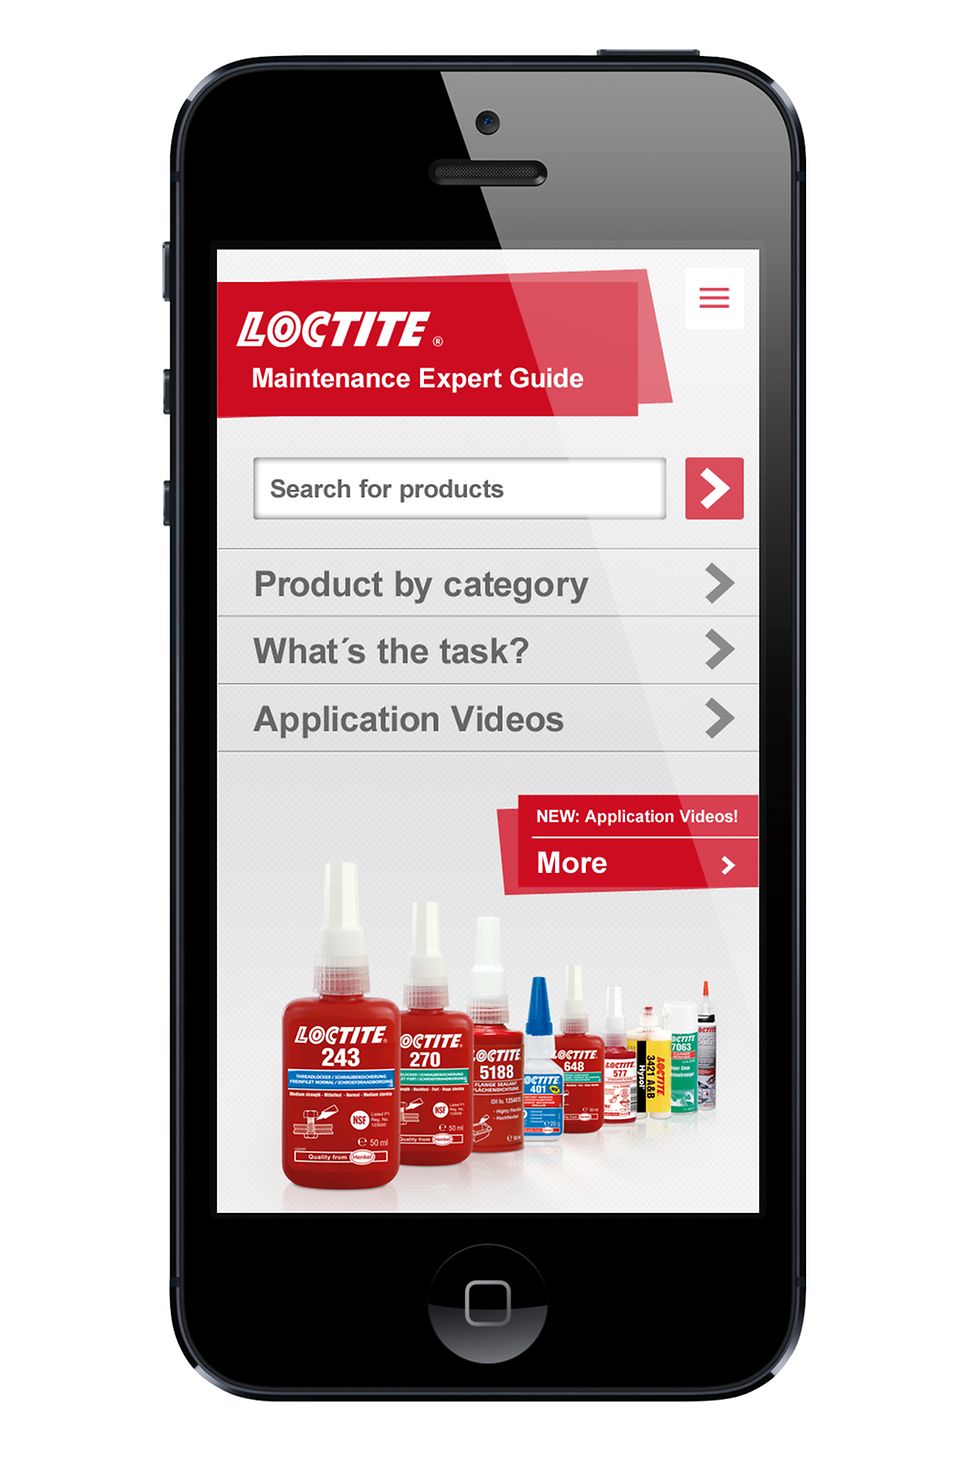 The Loctite Maintenance Expert Guide.